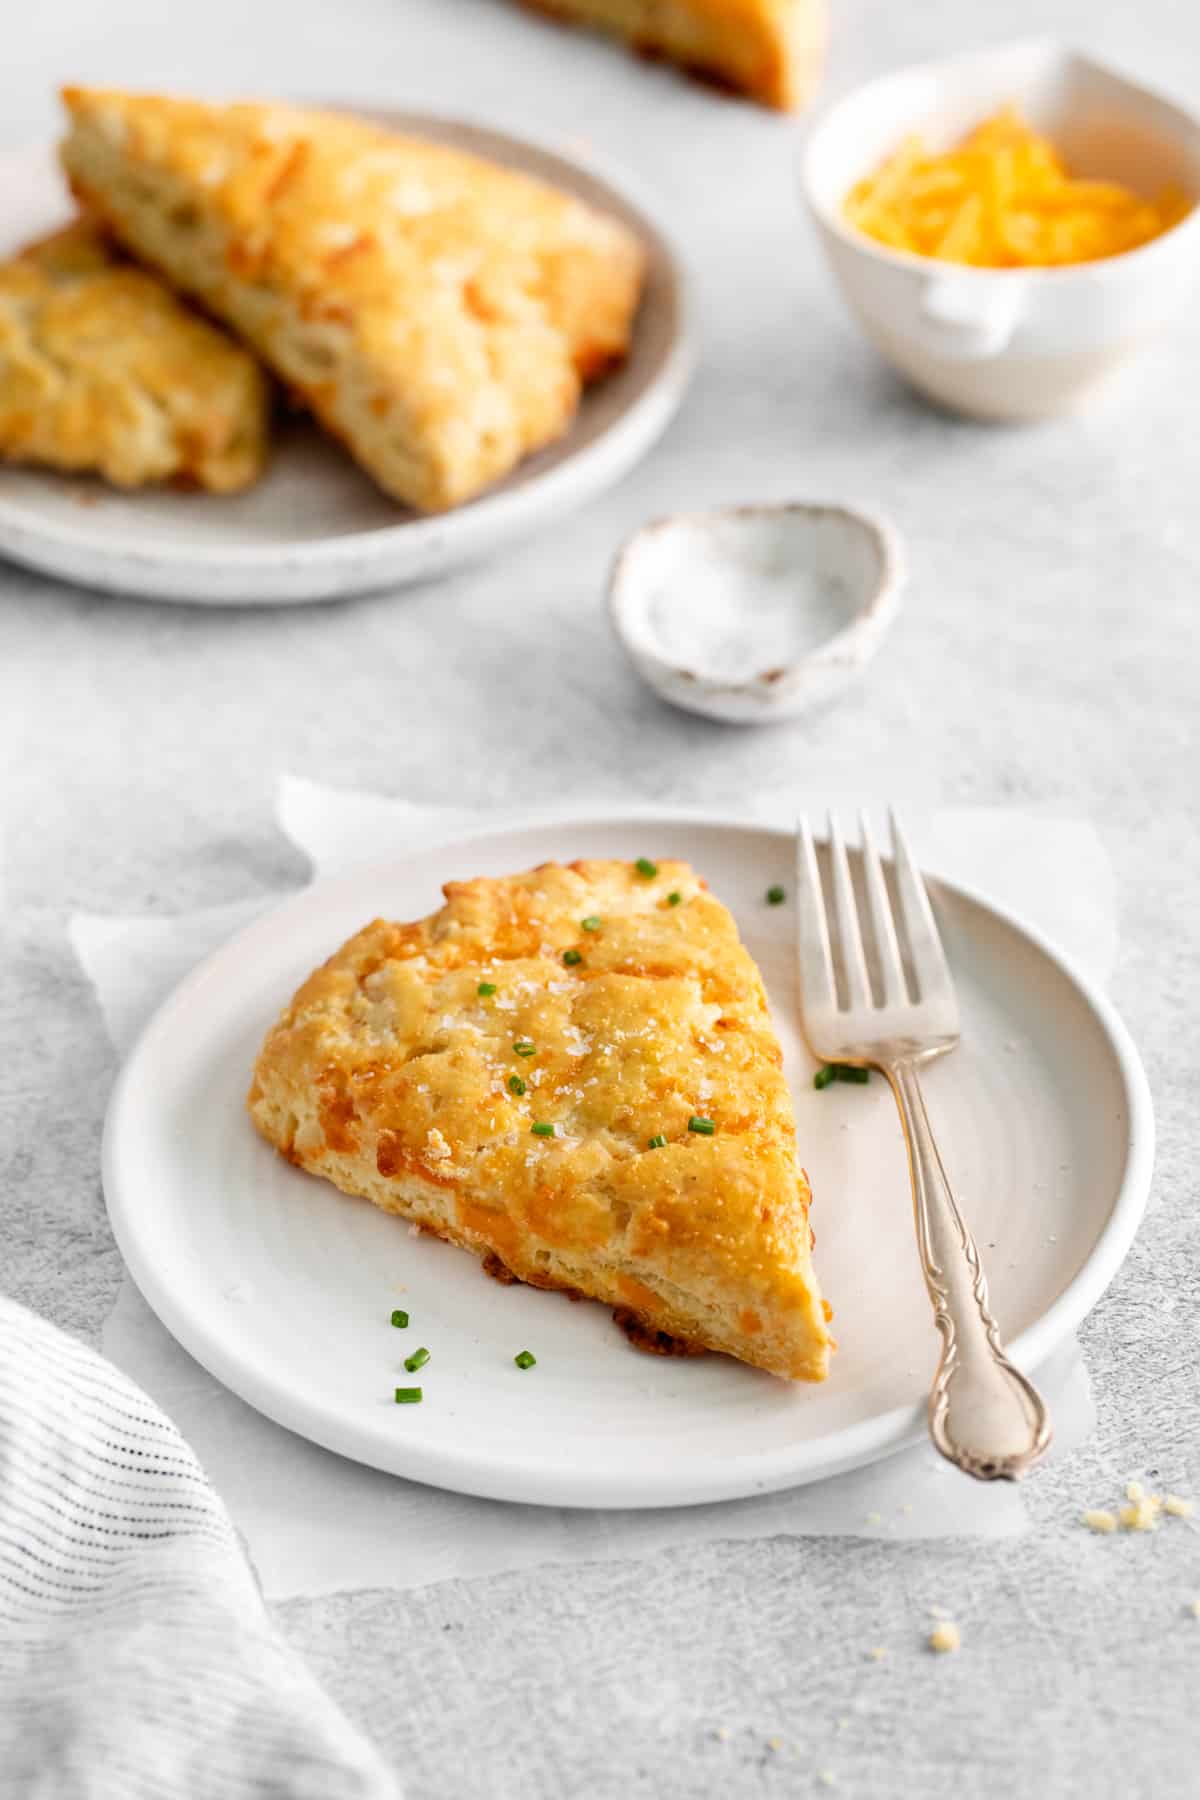 a cheddar scone on a plate with a fork